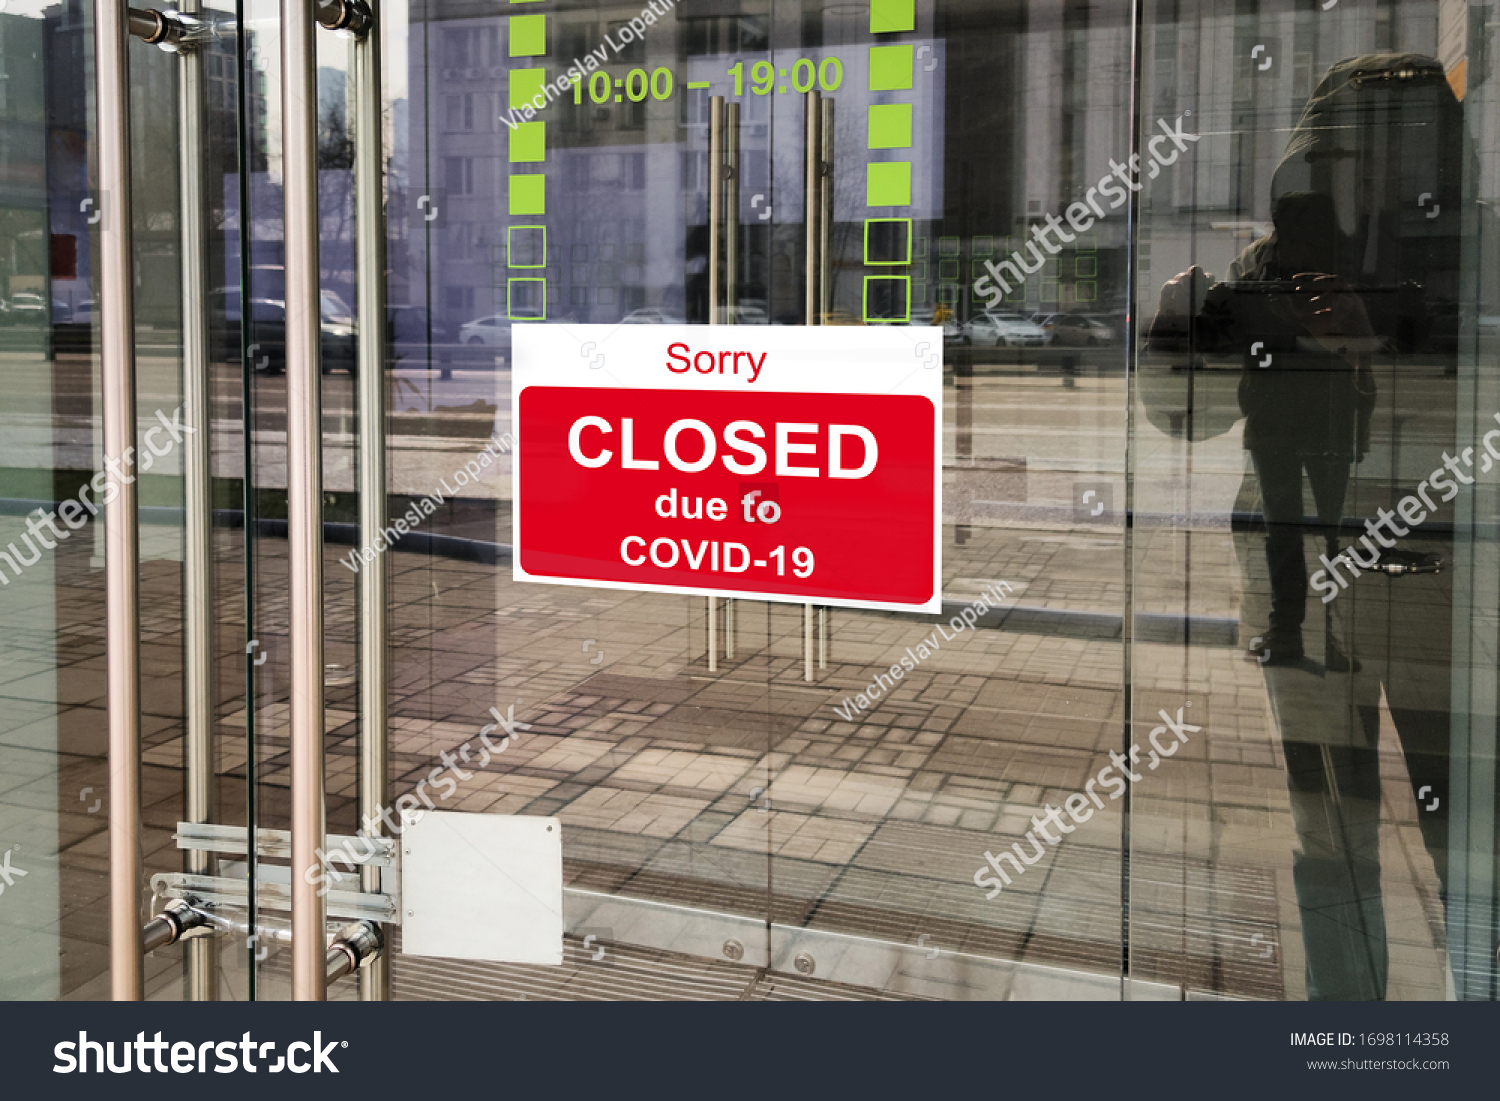 Business center closed due to COVID-19, sign with sorry in door. Stores, offices, other commercial buildings temporarily closed during coronavirus pandemic. Economy crisis and lockdown concept. #1698114358